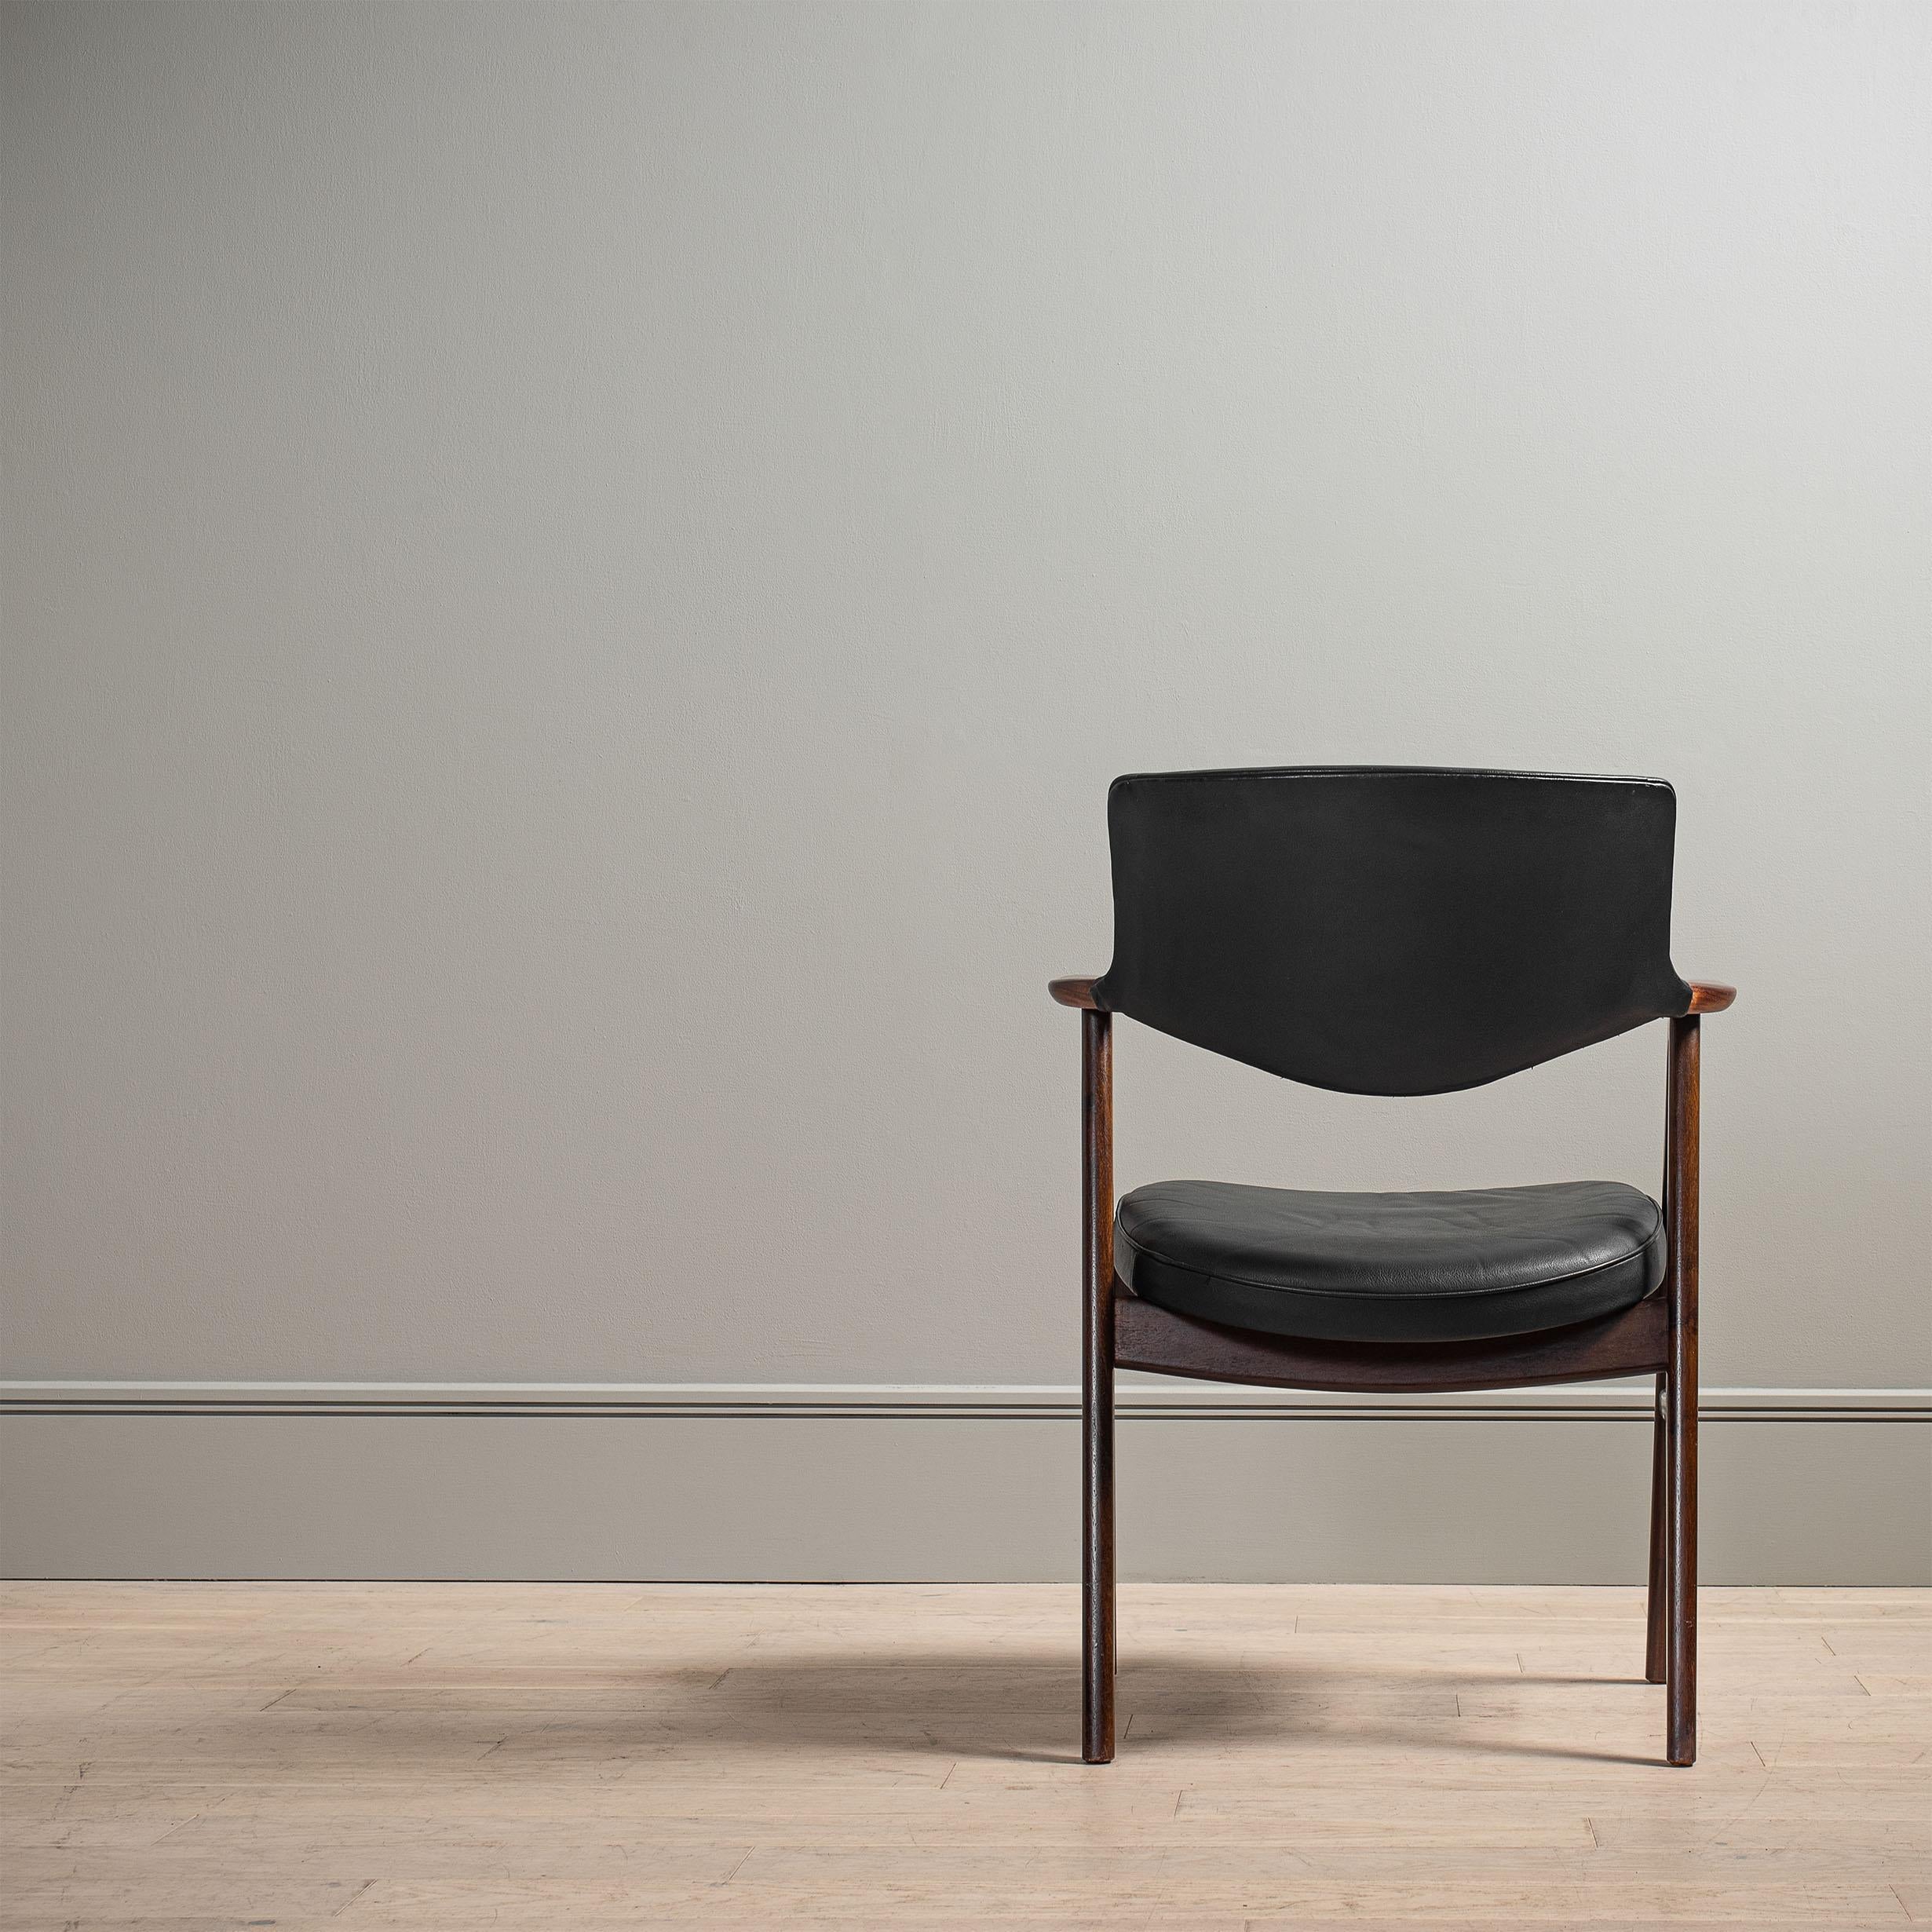 Leather Erik Kirkegaard Chair, 1950 In Good Condition For Sale In London, GB